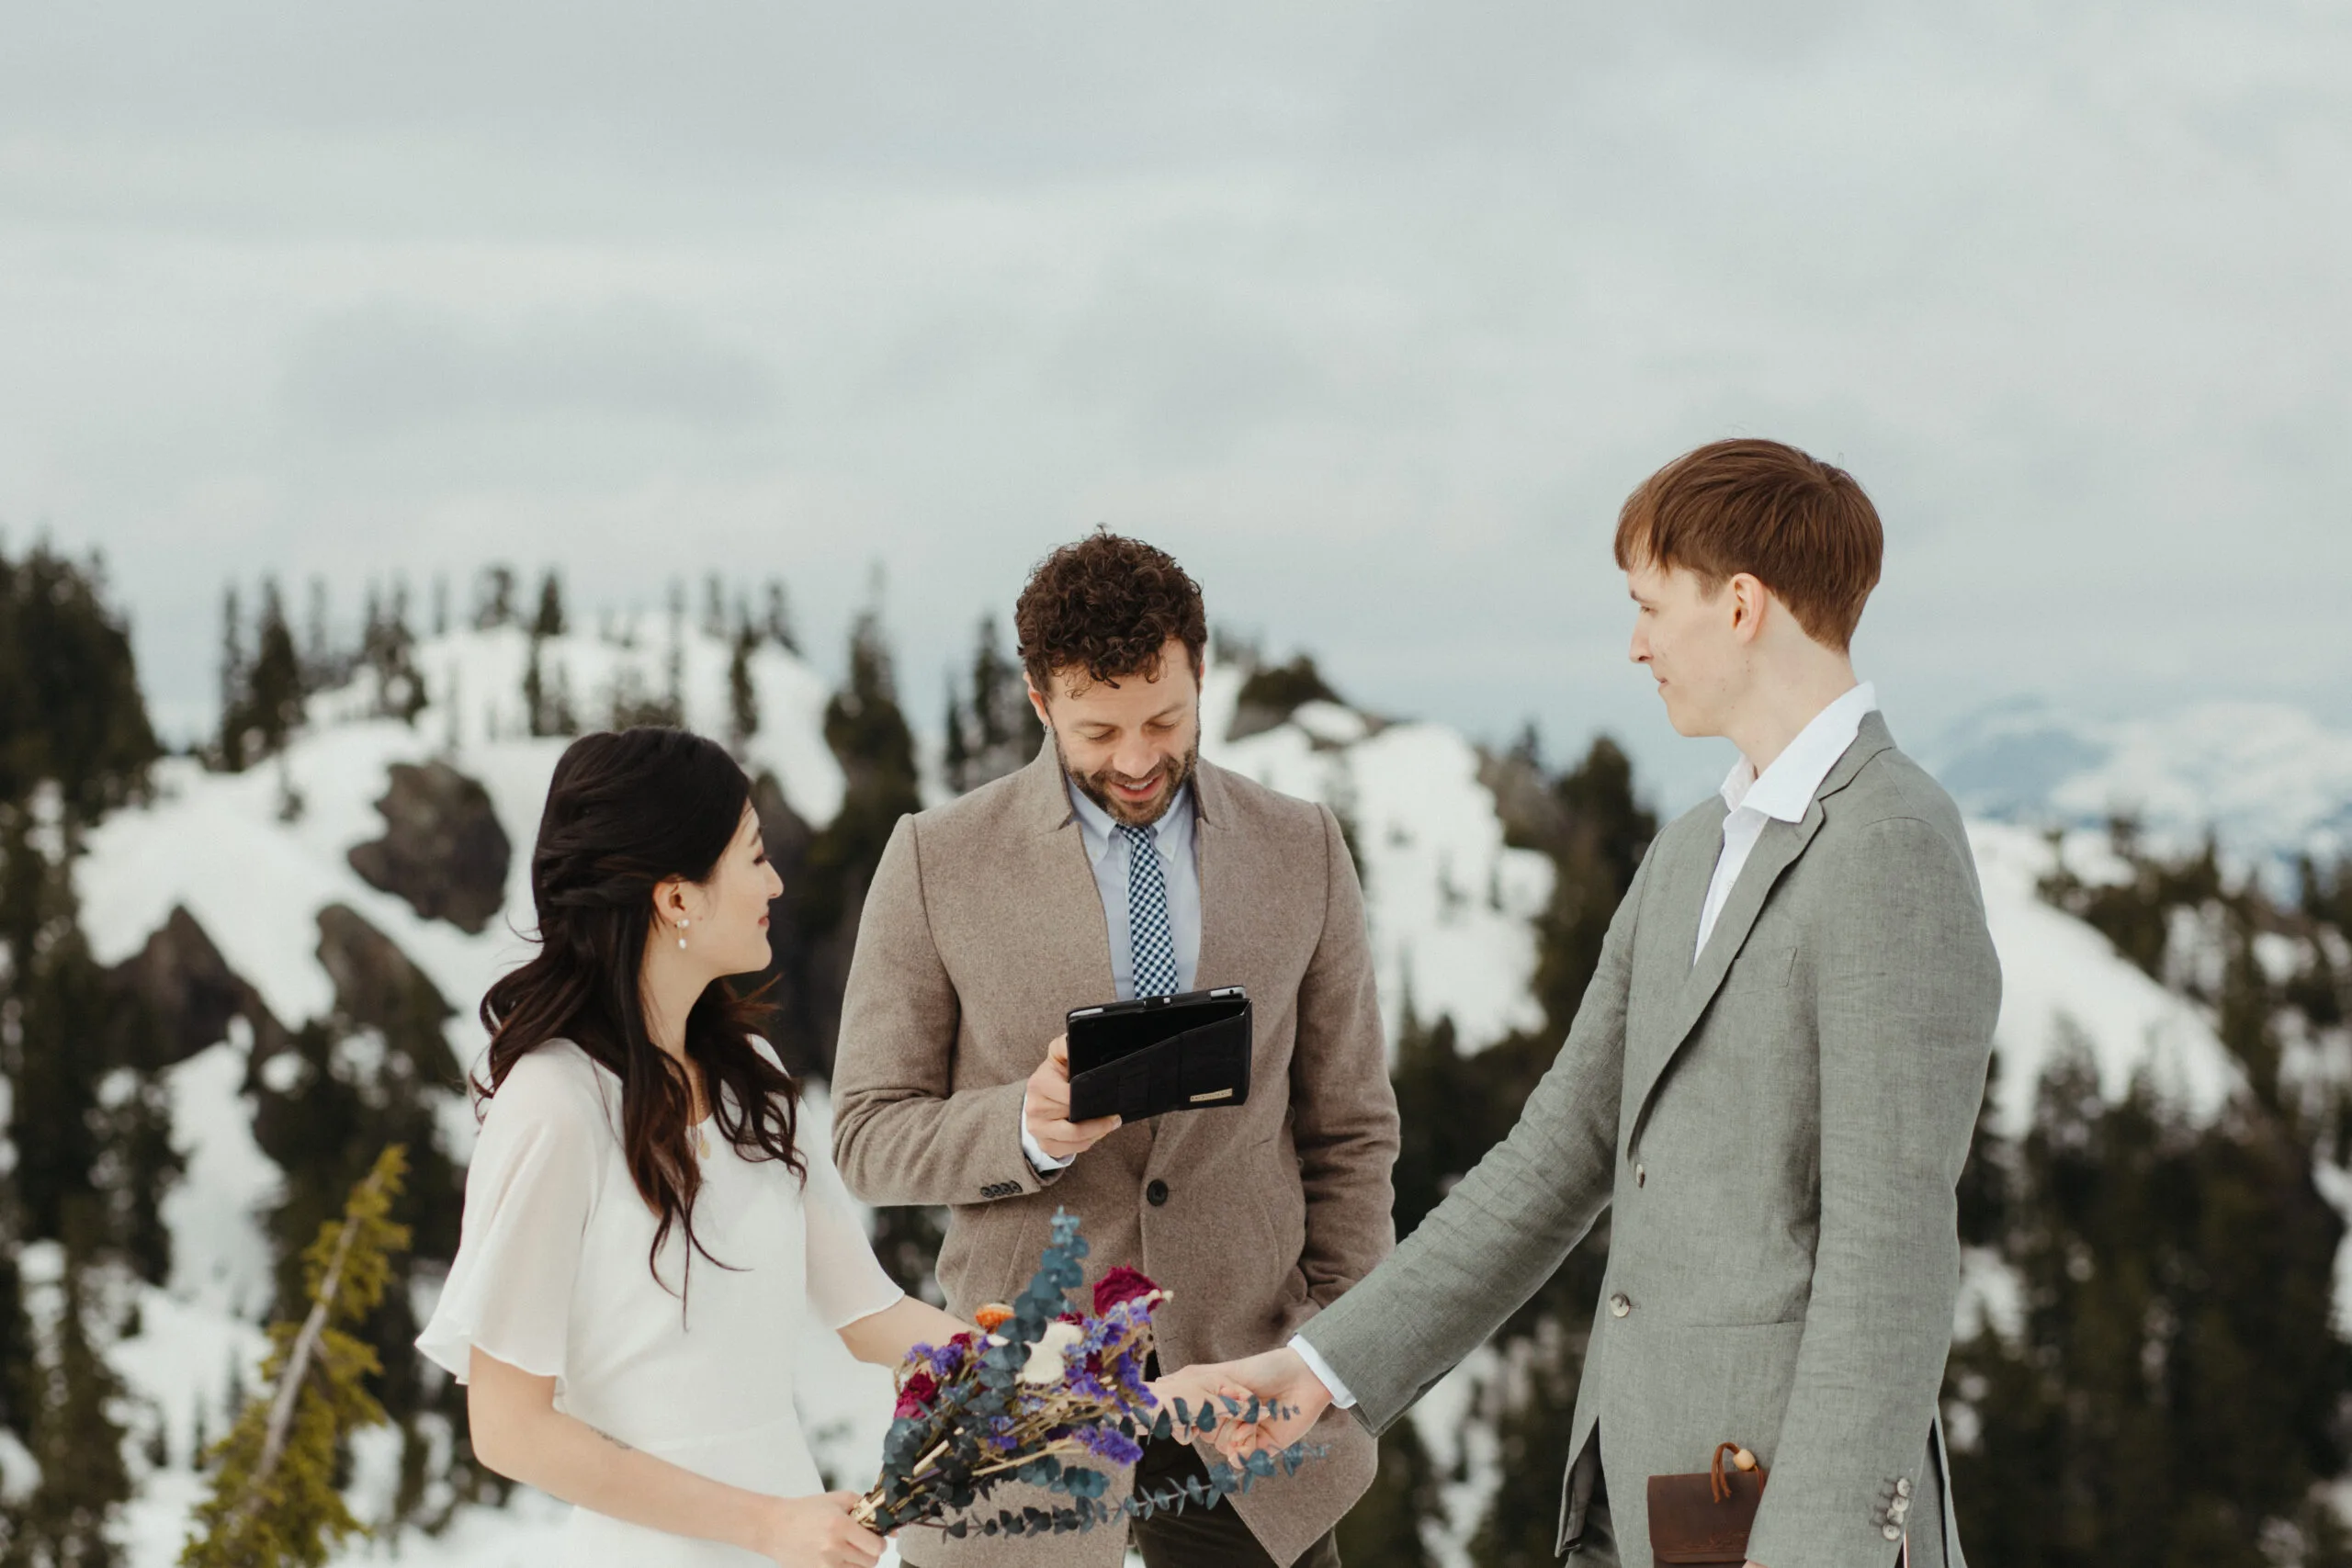 Tiffany + Russell with Officiant Stephen by Keely Rae Photography